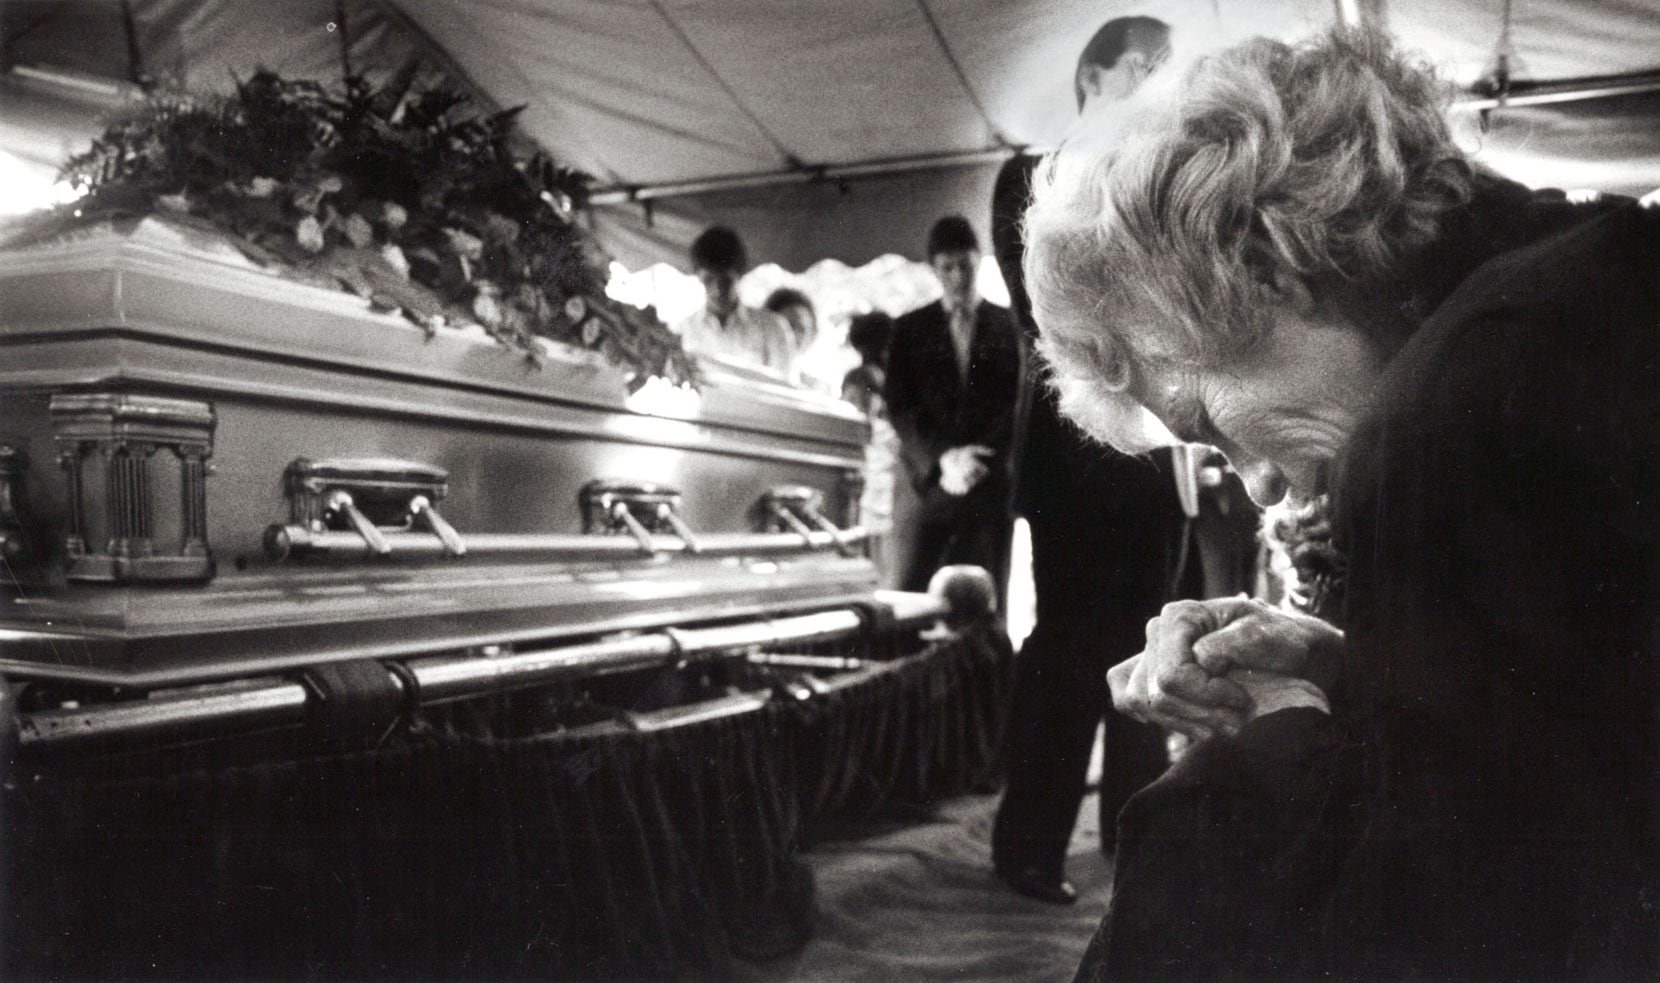 Doris Adkisson bows her head and prays for her son Mike Von Erich during his funeral...